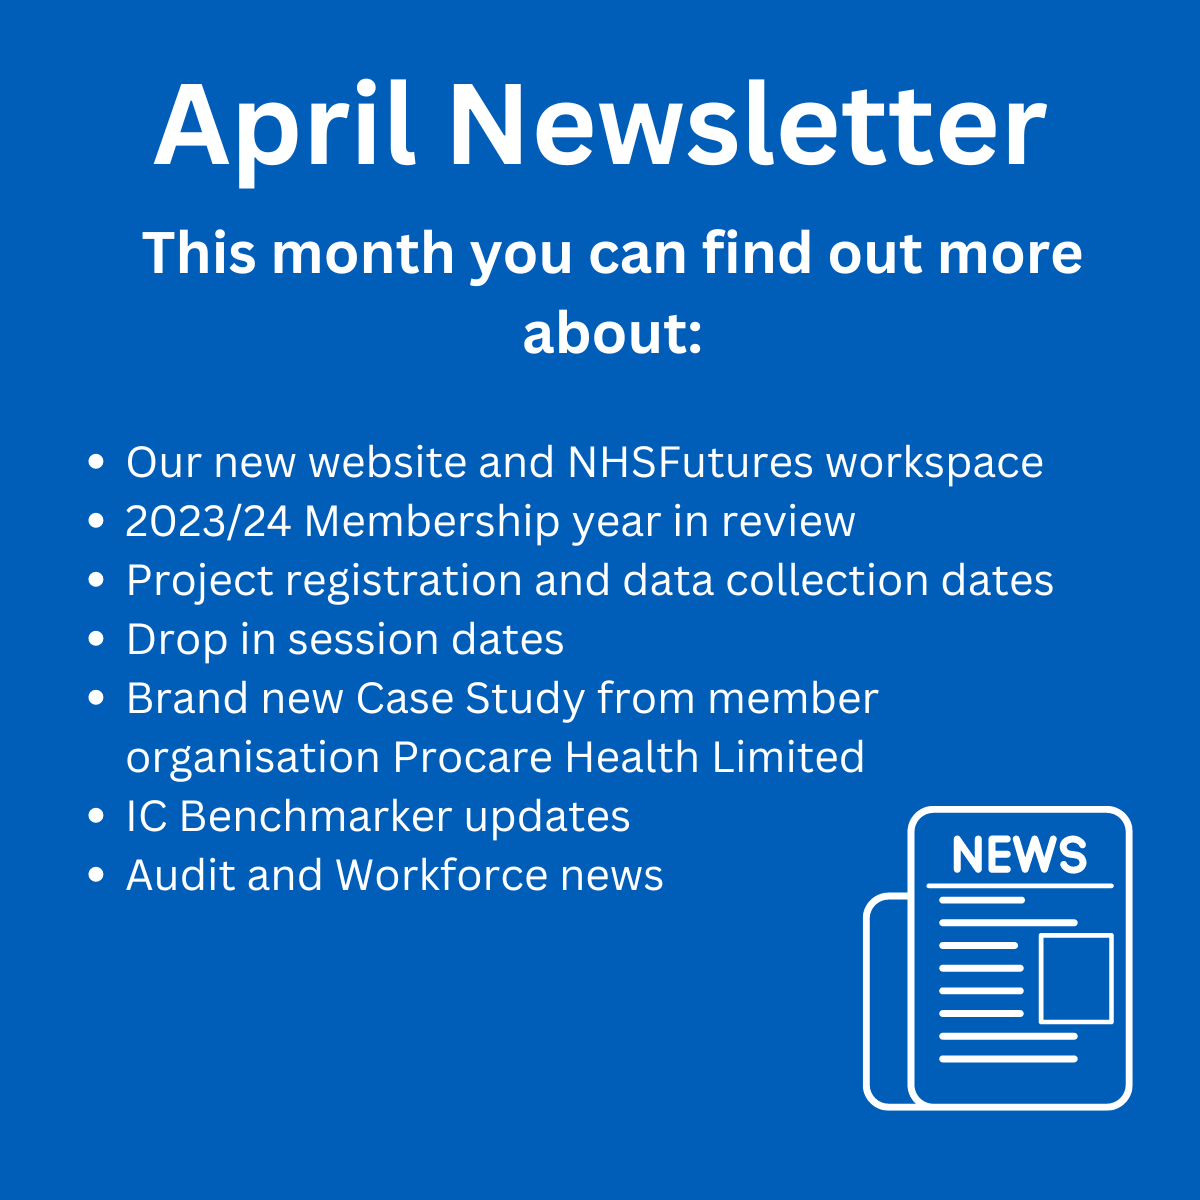 📢 Our April newsletter is now available! Subscribed users will have their copy in their inbox now! Want to keep up with Network news? to subscribe sign up here bit.ly/4auEz22 #Newsletter #NHSBN #Updates #April #Benchmarking #data